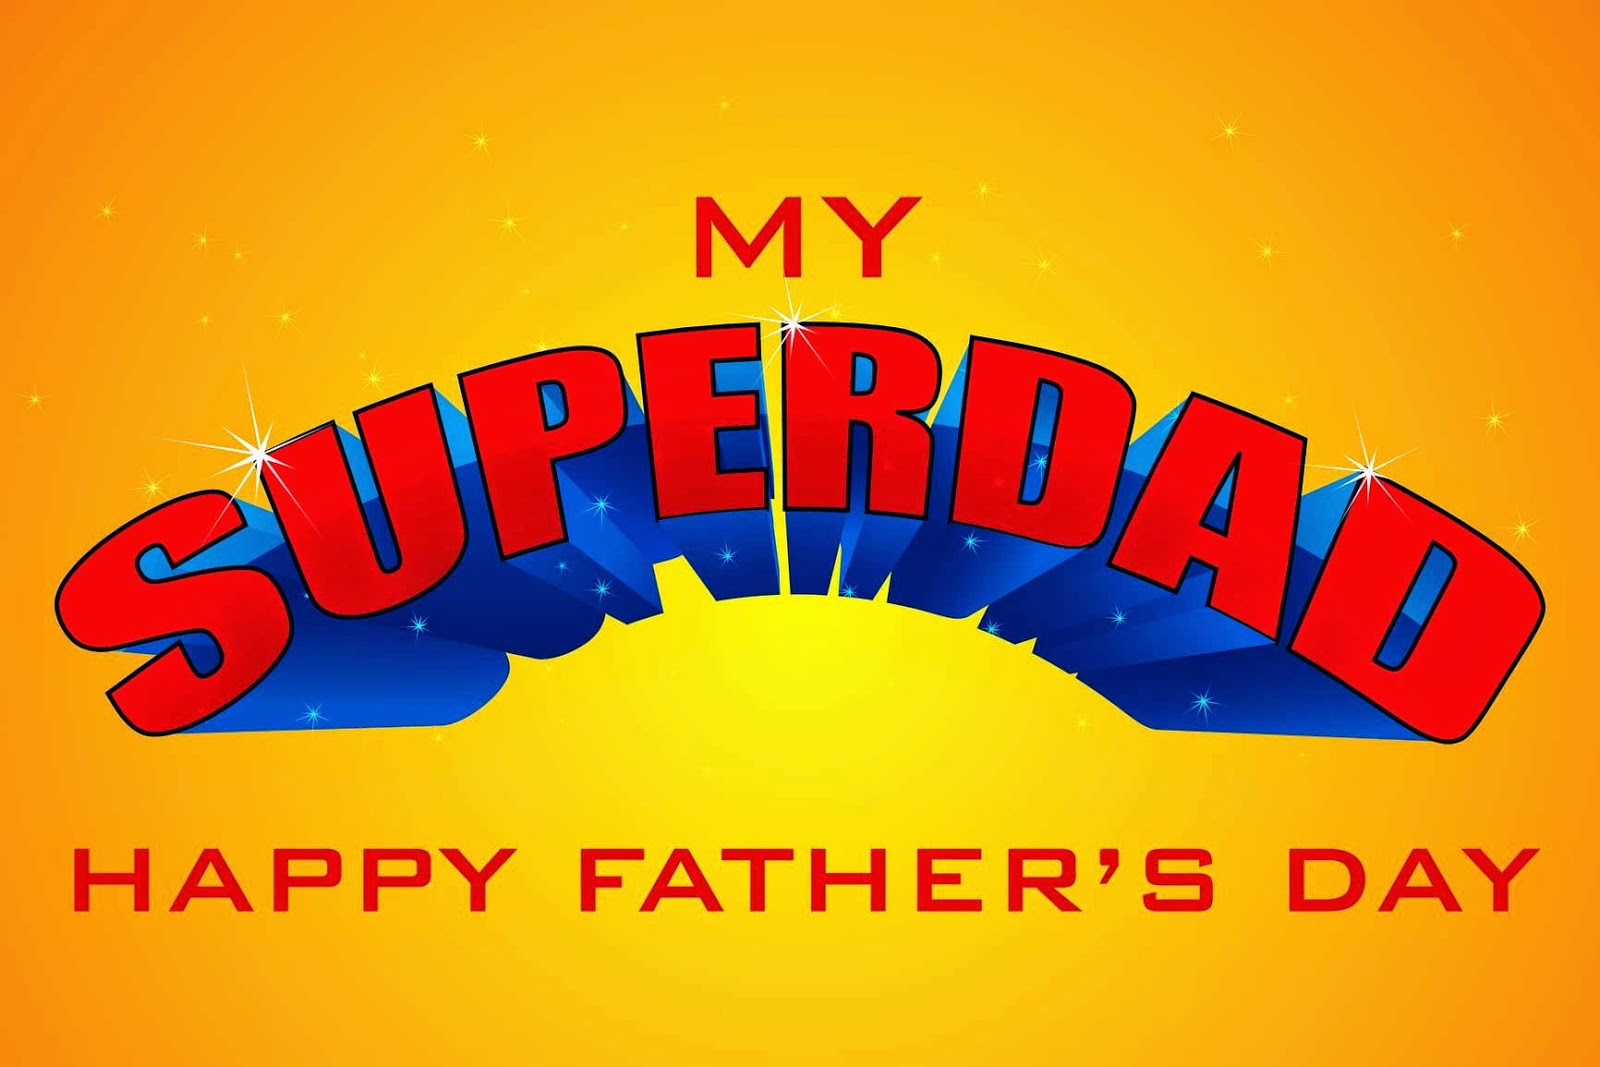 Happy Father's Day 2019 HD Images, Pictures, And Wallpapers For Instagram,  WhatsApp, Twitter, And Facebook – 40+ High-Quality Images Available Here